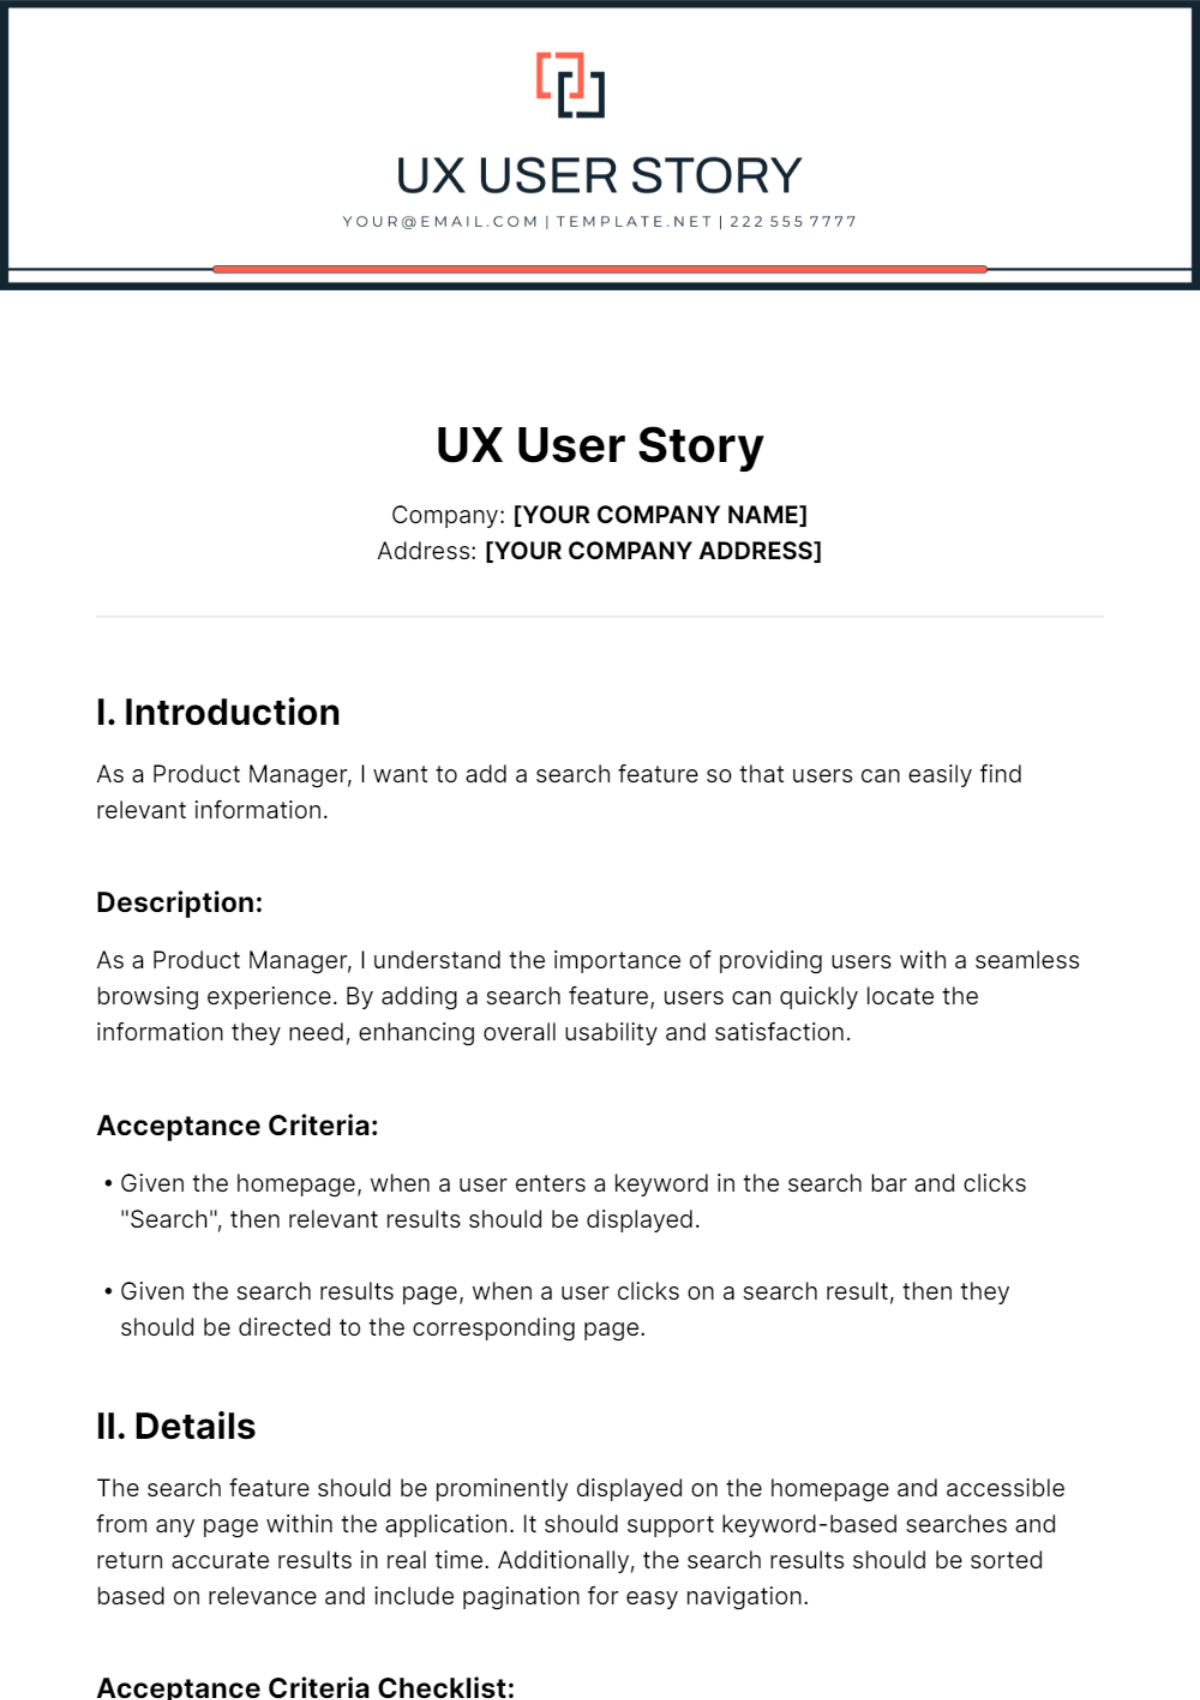 UX User Story Template